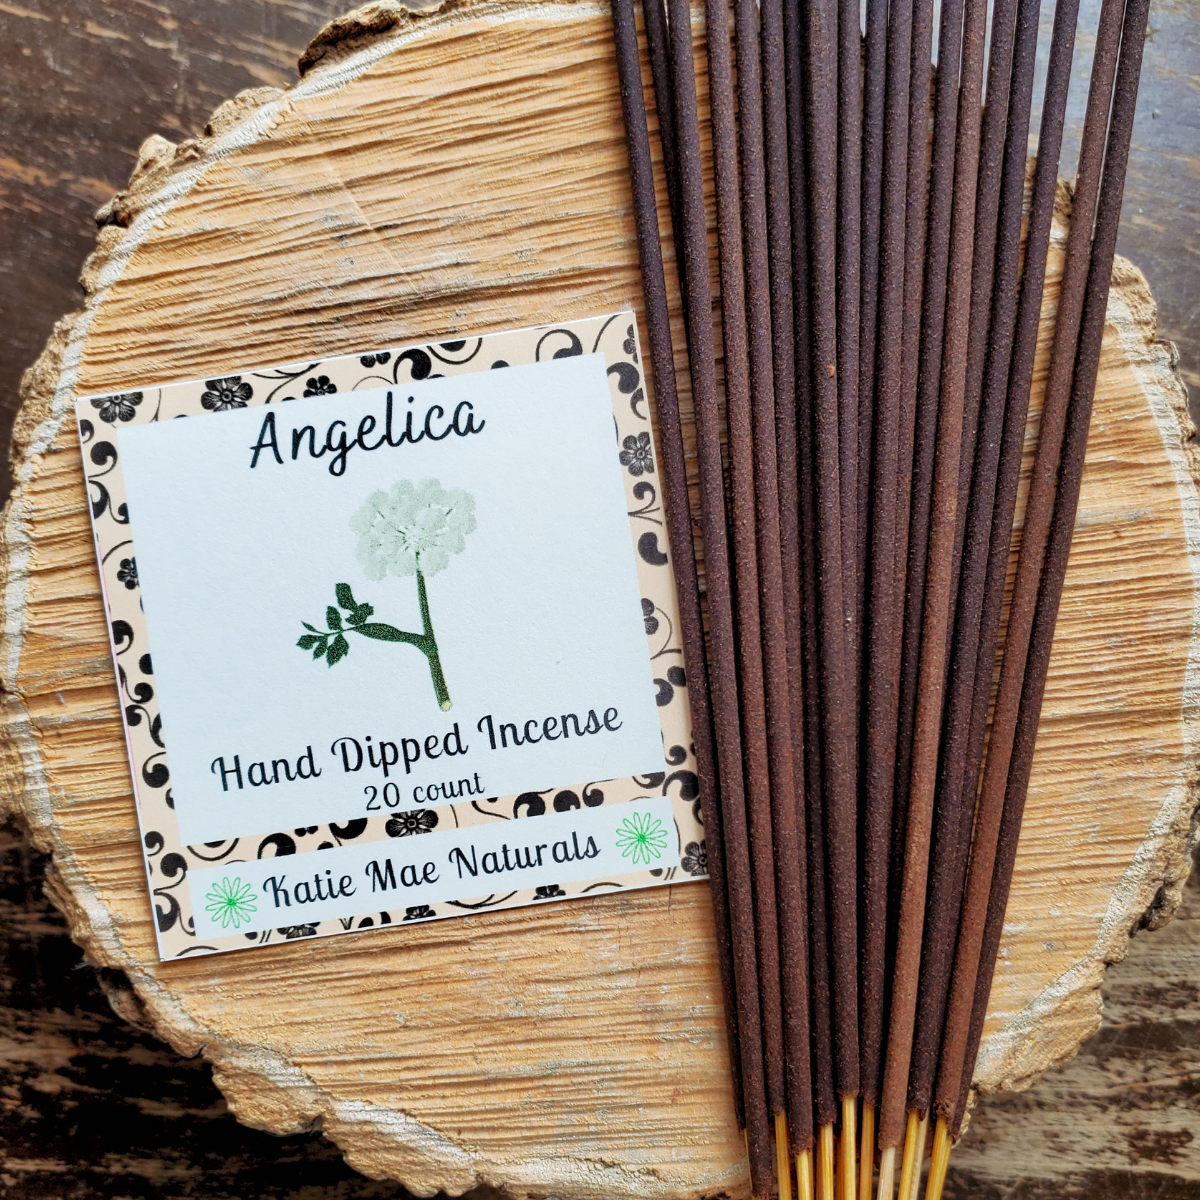 Angelica scented hand dipped incense sticks